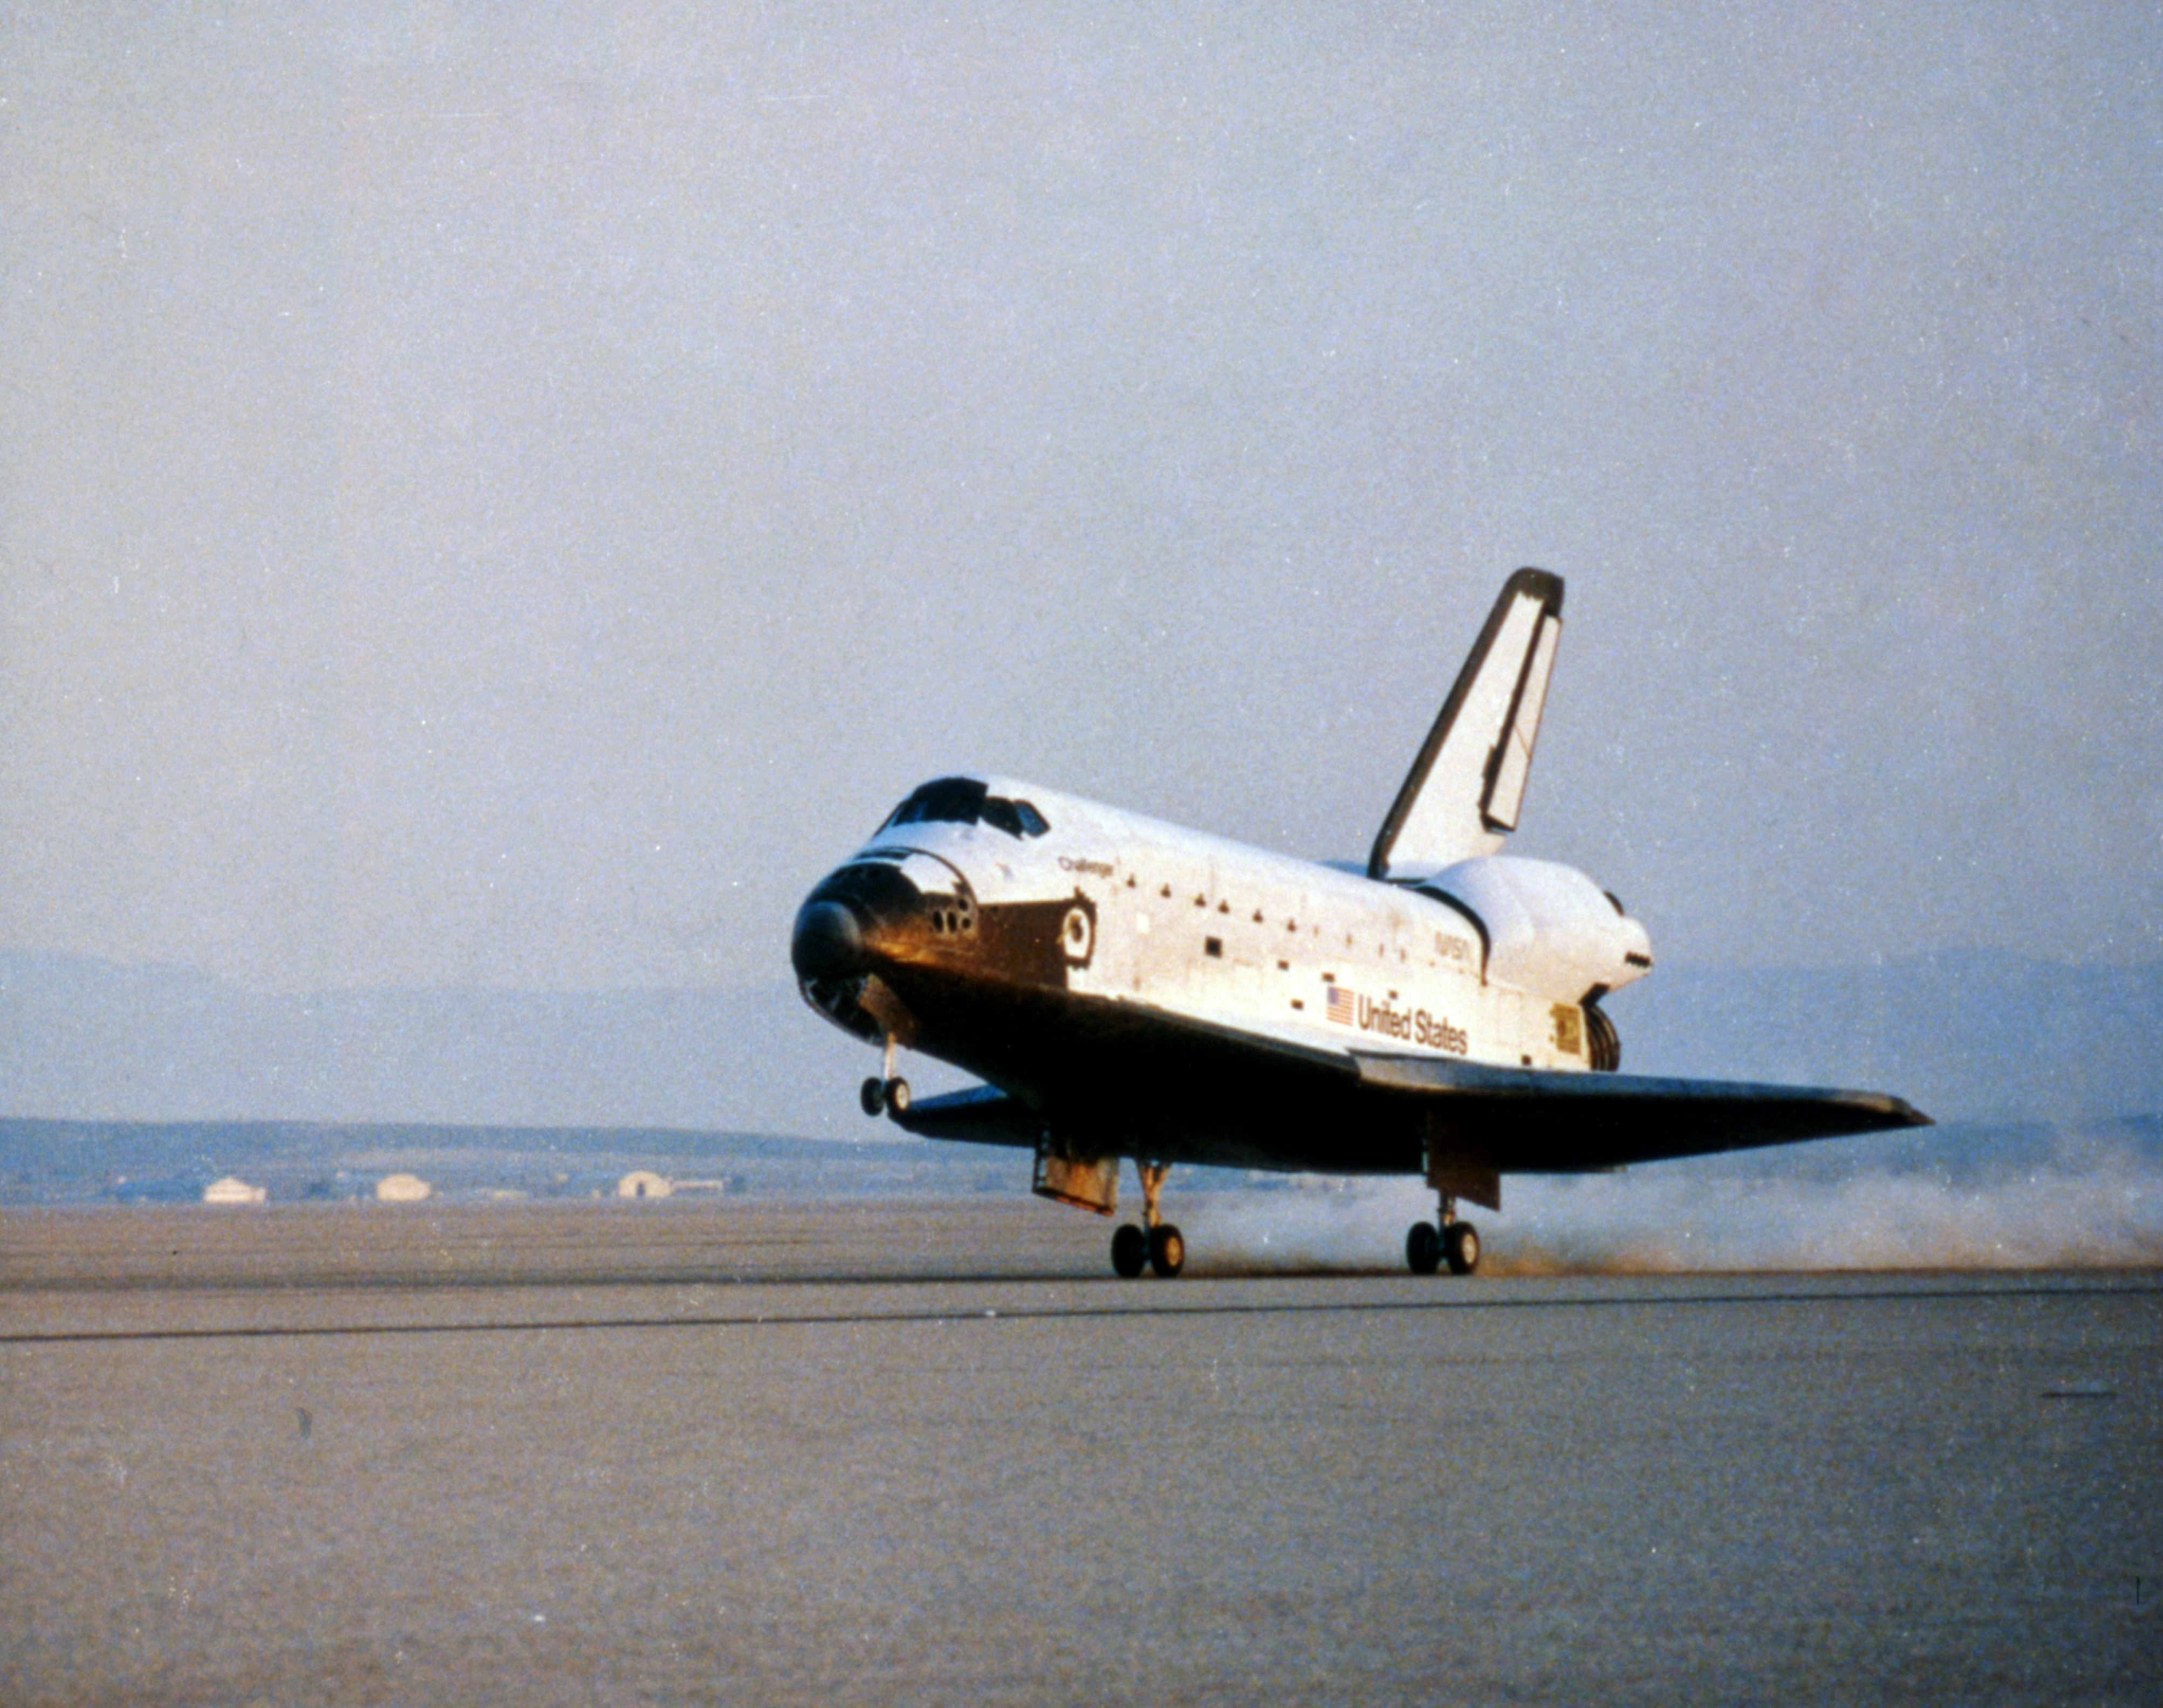 Space shuttle Challenger rolls down the runway at Edwards Air Force Base in California to end the STS-41C mission